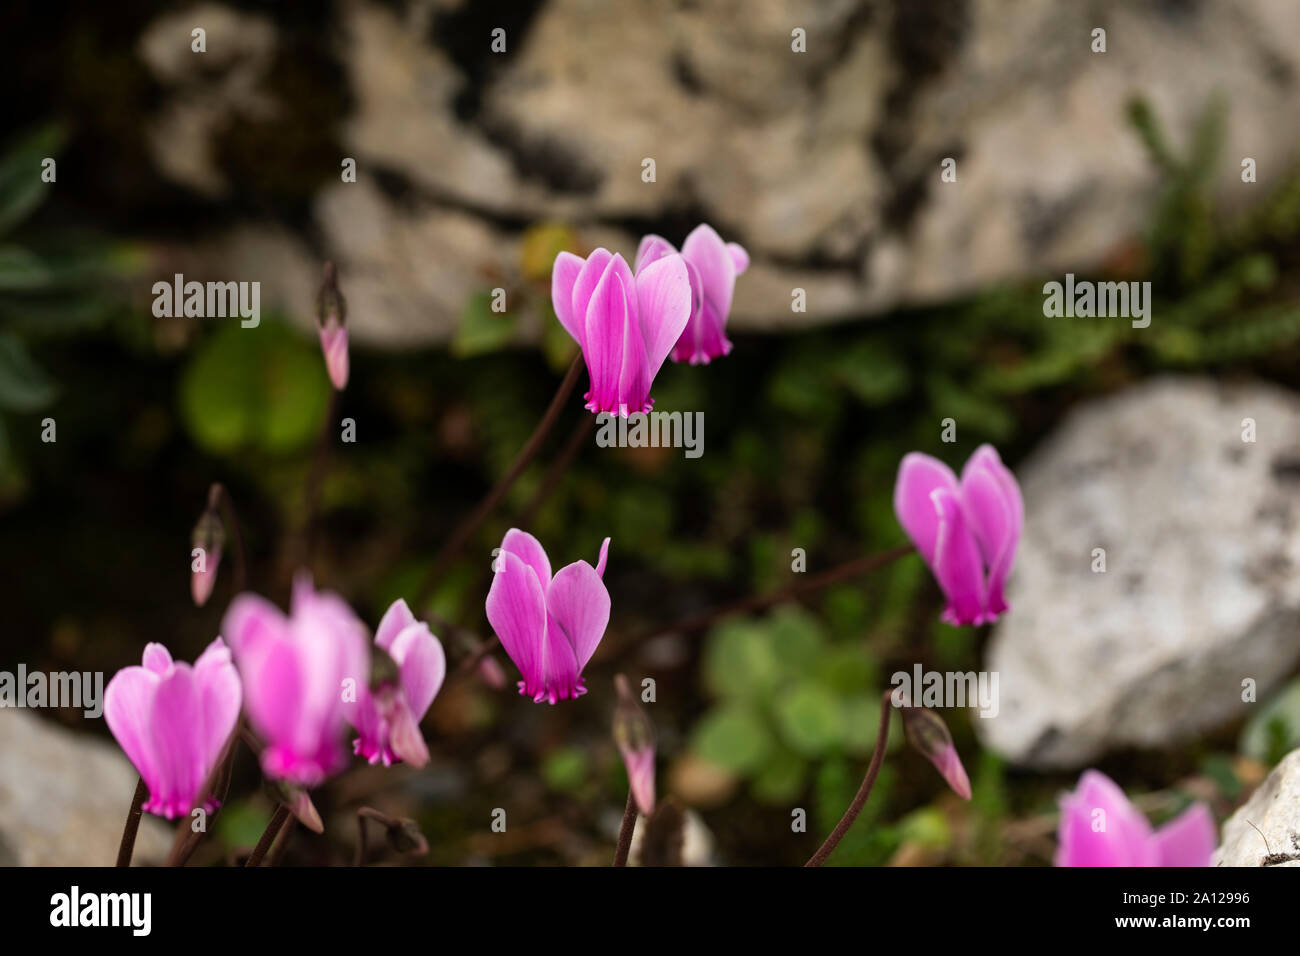 Ivy-leaved cyclamen (Cyclamen hederifolium), also known as sowbread, growing in a rock garden. Stock Photo